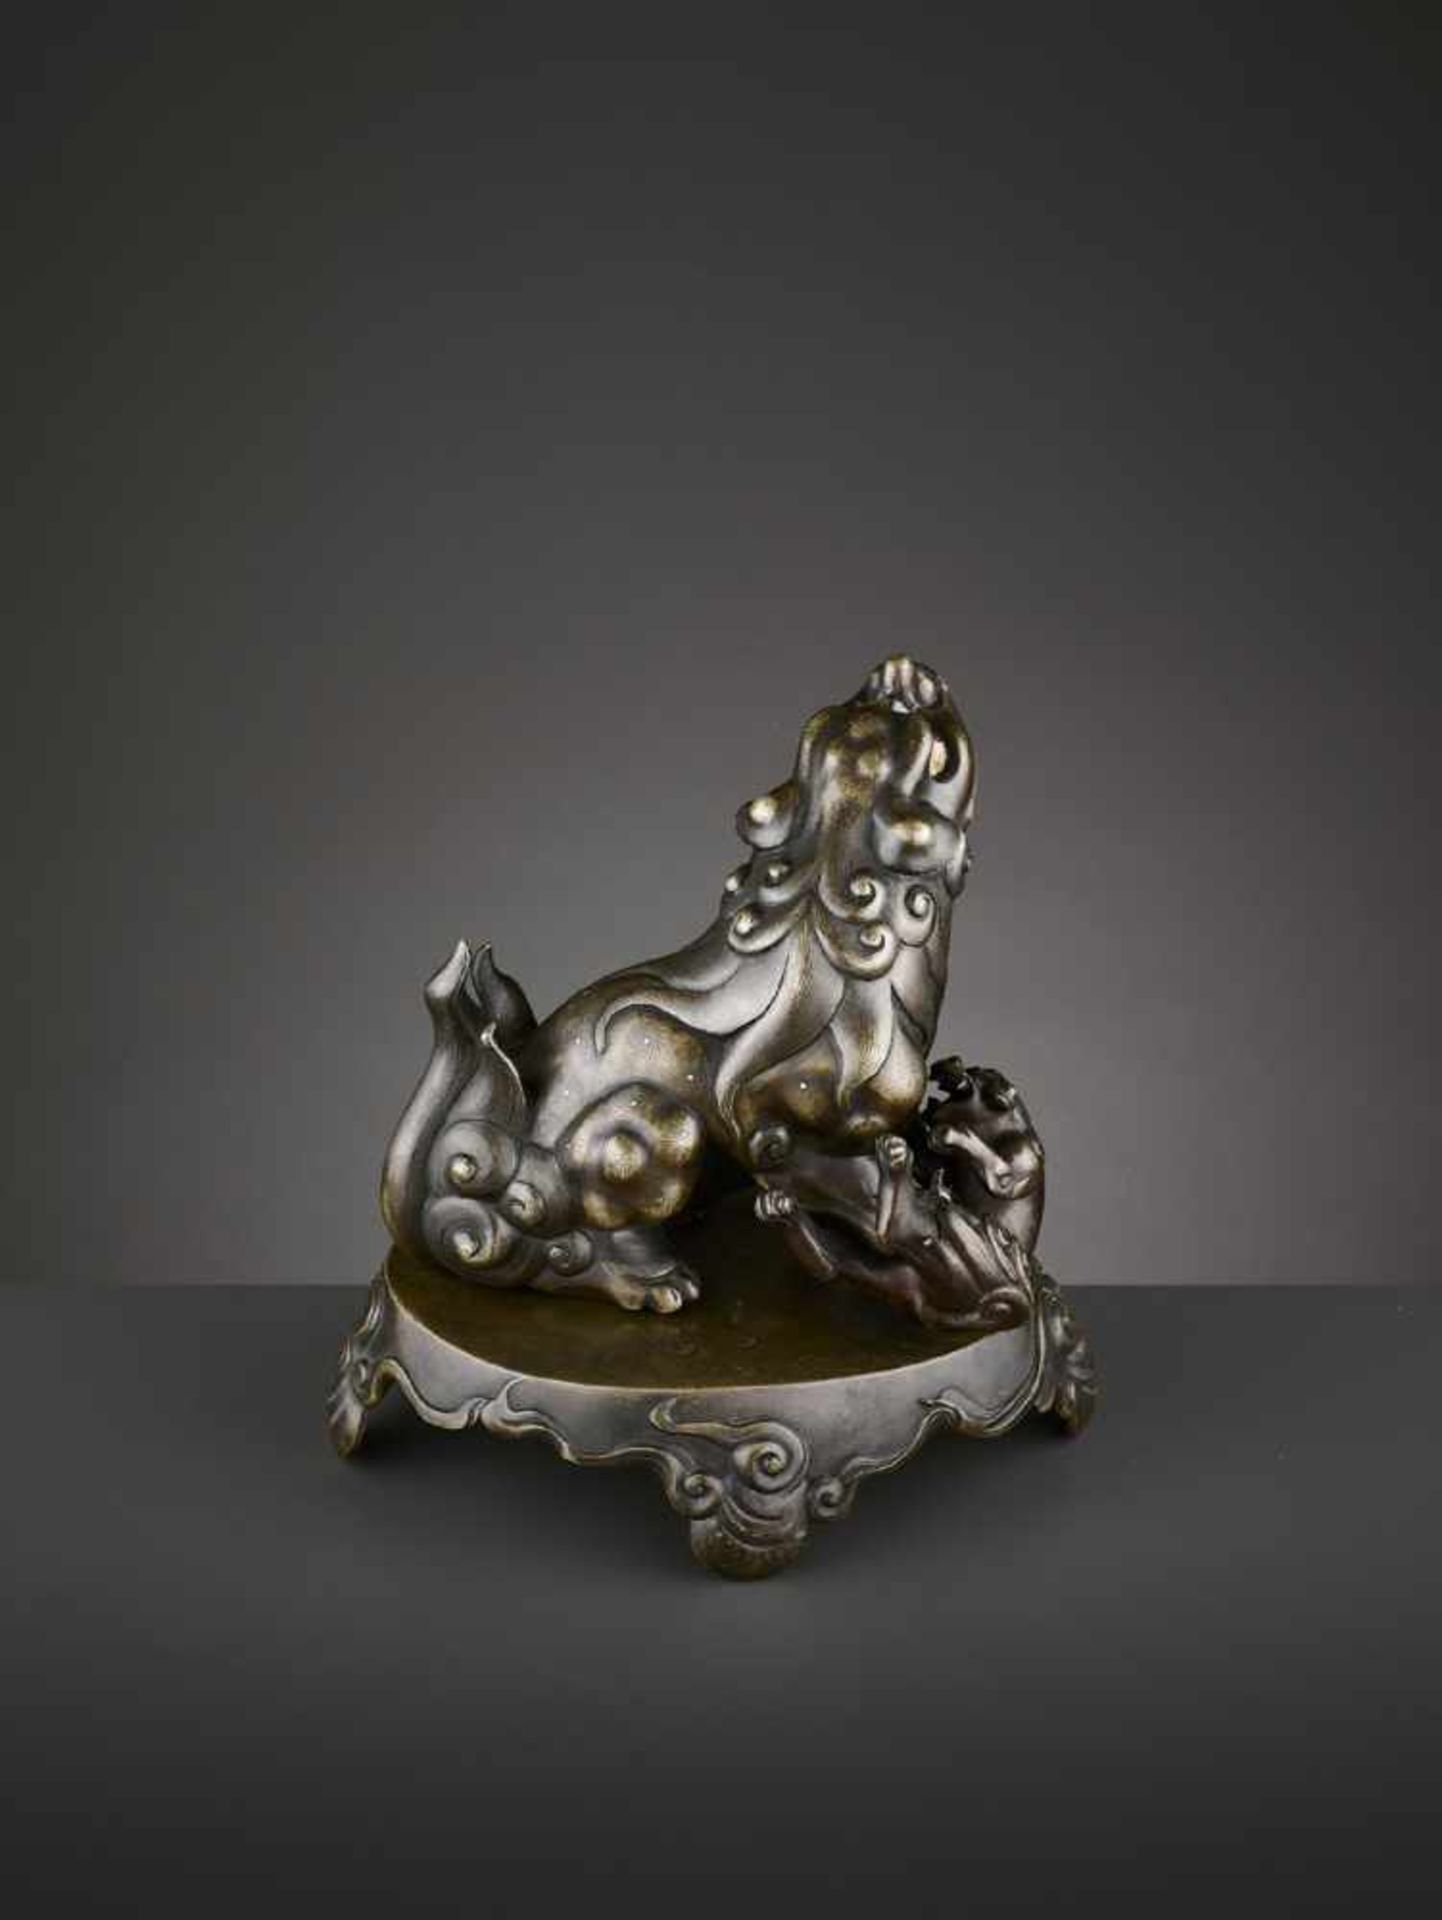 A SILVER- AND GOLD-INLAID BRONZE CENSER, KANGXI China, early 18th century. Heavily cast as a - Image 8 of 12